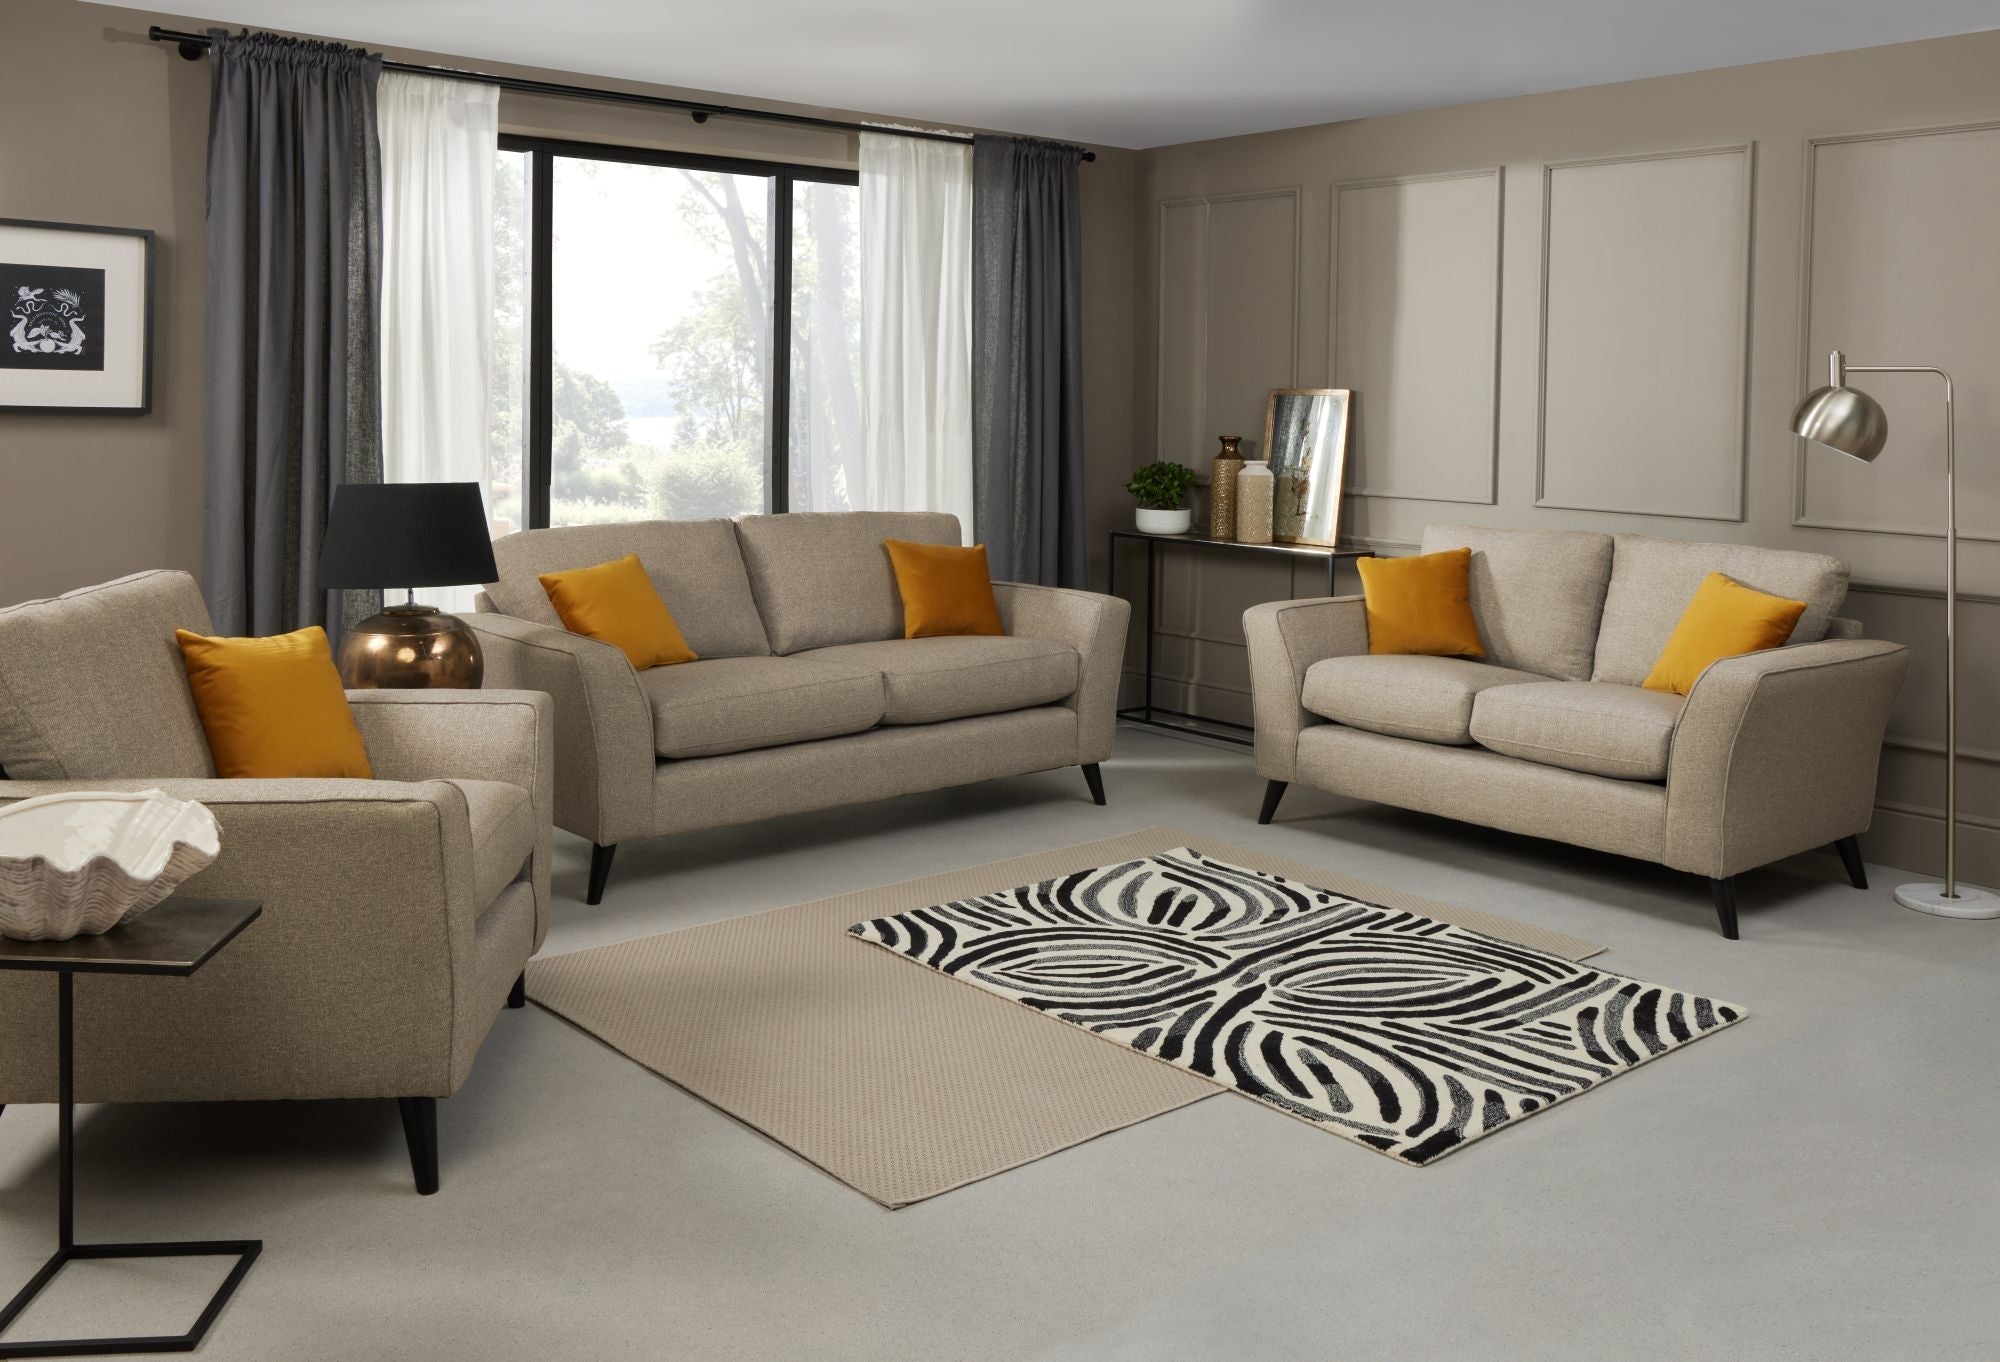 Libby 2 seater, 3 seater and armchair in Oatmeal shown in a room setting 